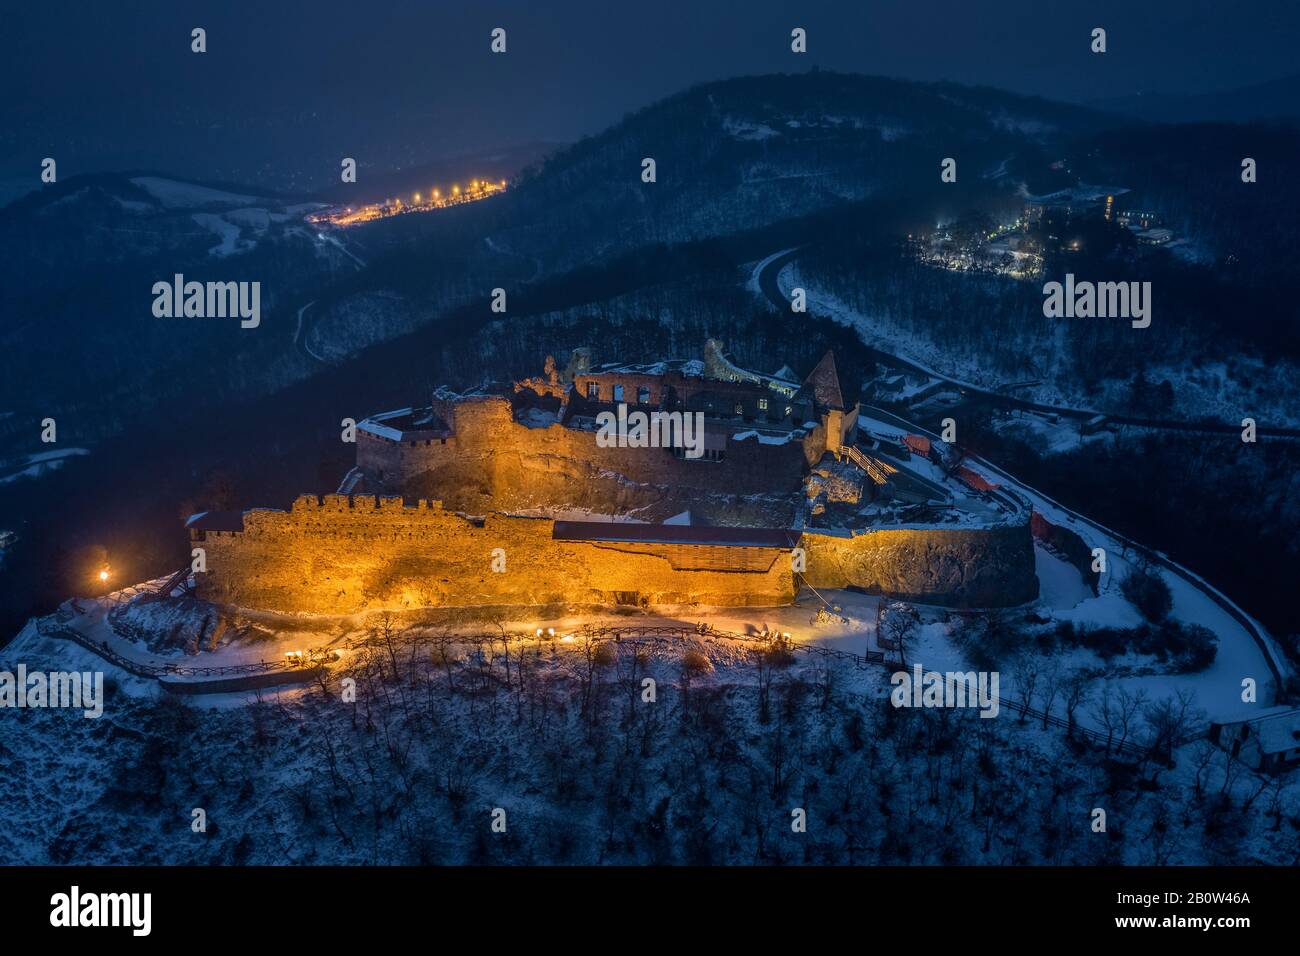 Visegrad, Hungary - Aerial view of the beautiful, illuminated high castle of Visegrad at blue hour with snowy hills of Pilis on a winter night Stock Photo